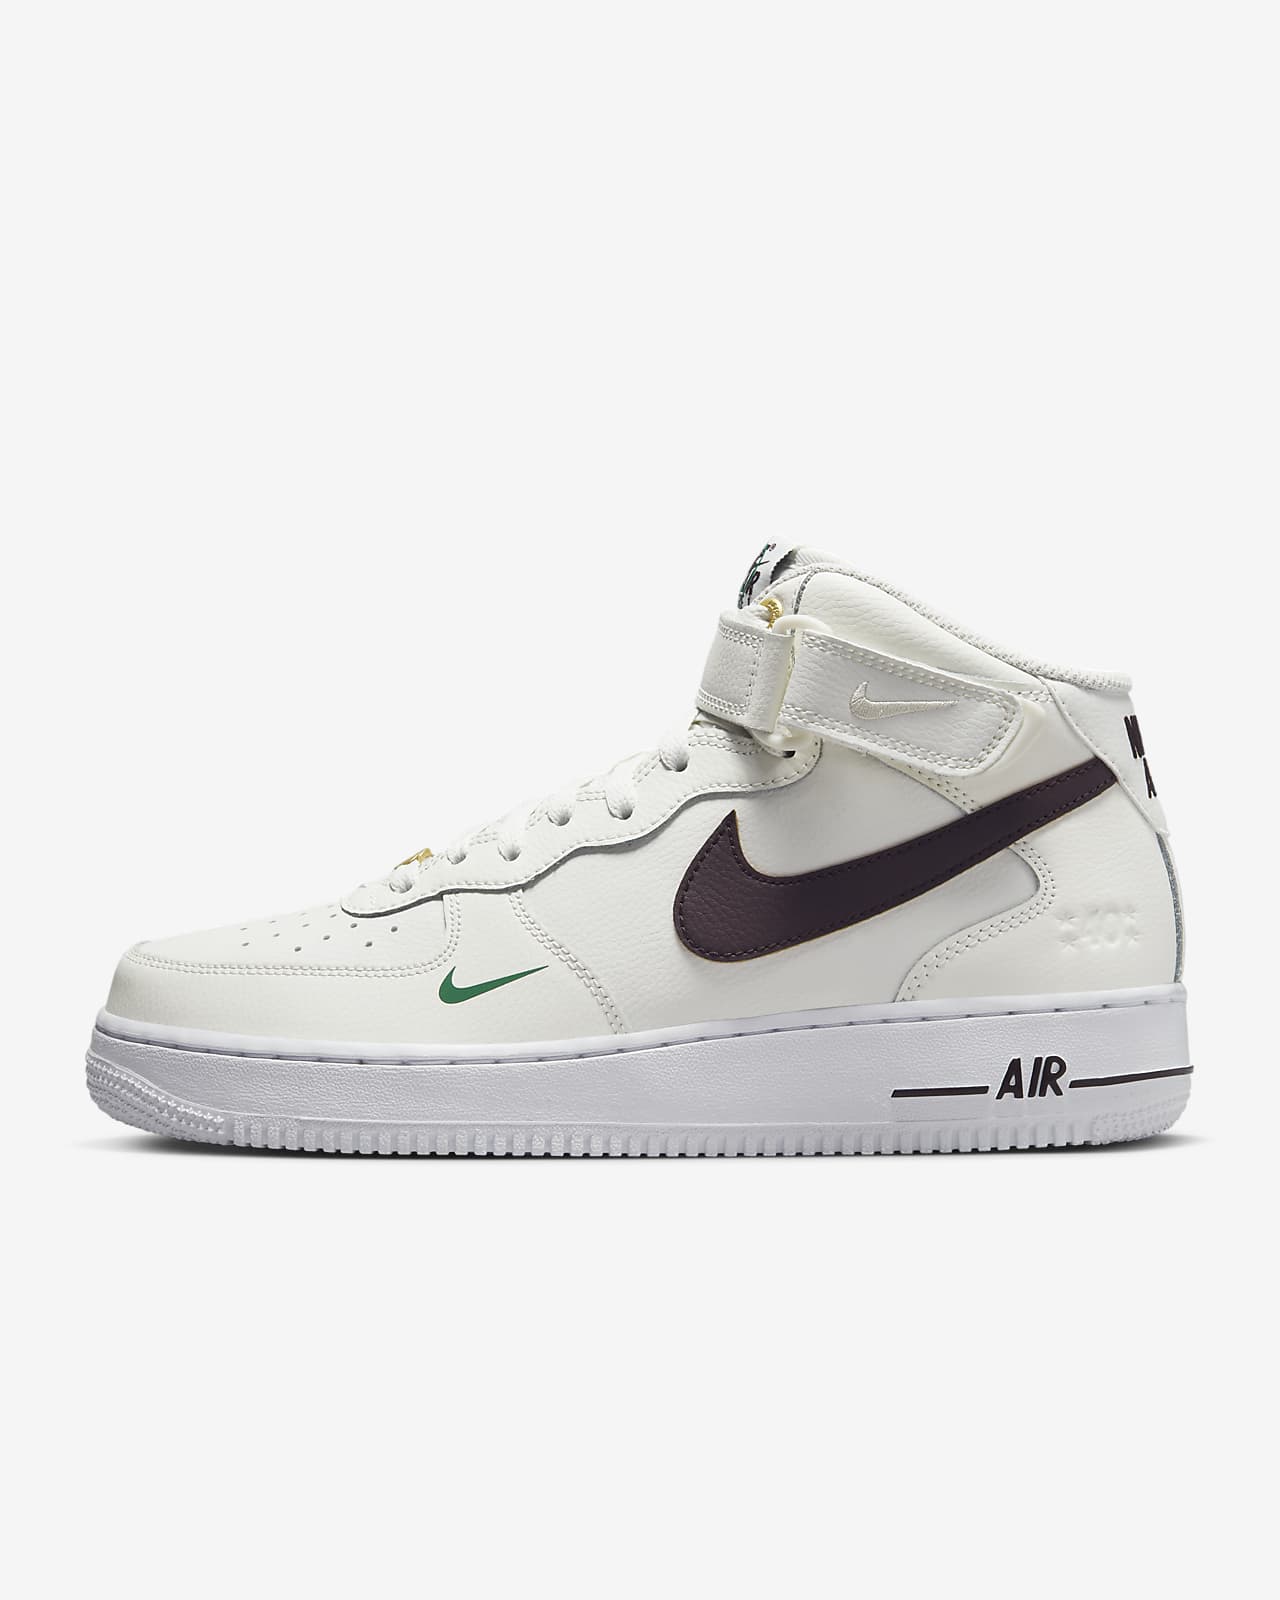 Disciplinary Whimsical Specialize Nike Air Force 1 Mid '07 LV8 Men's Shoes. Nike.com